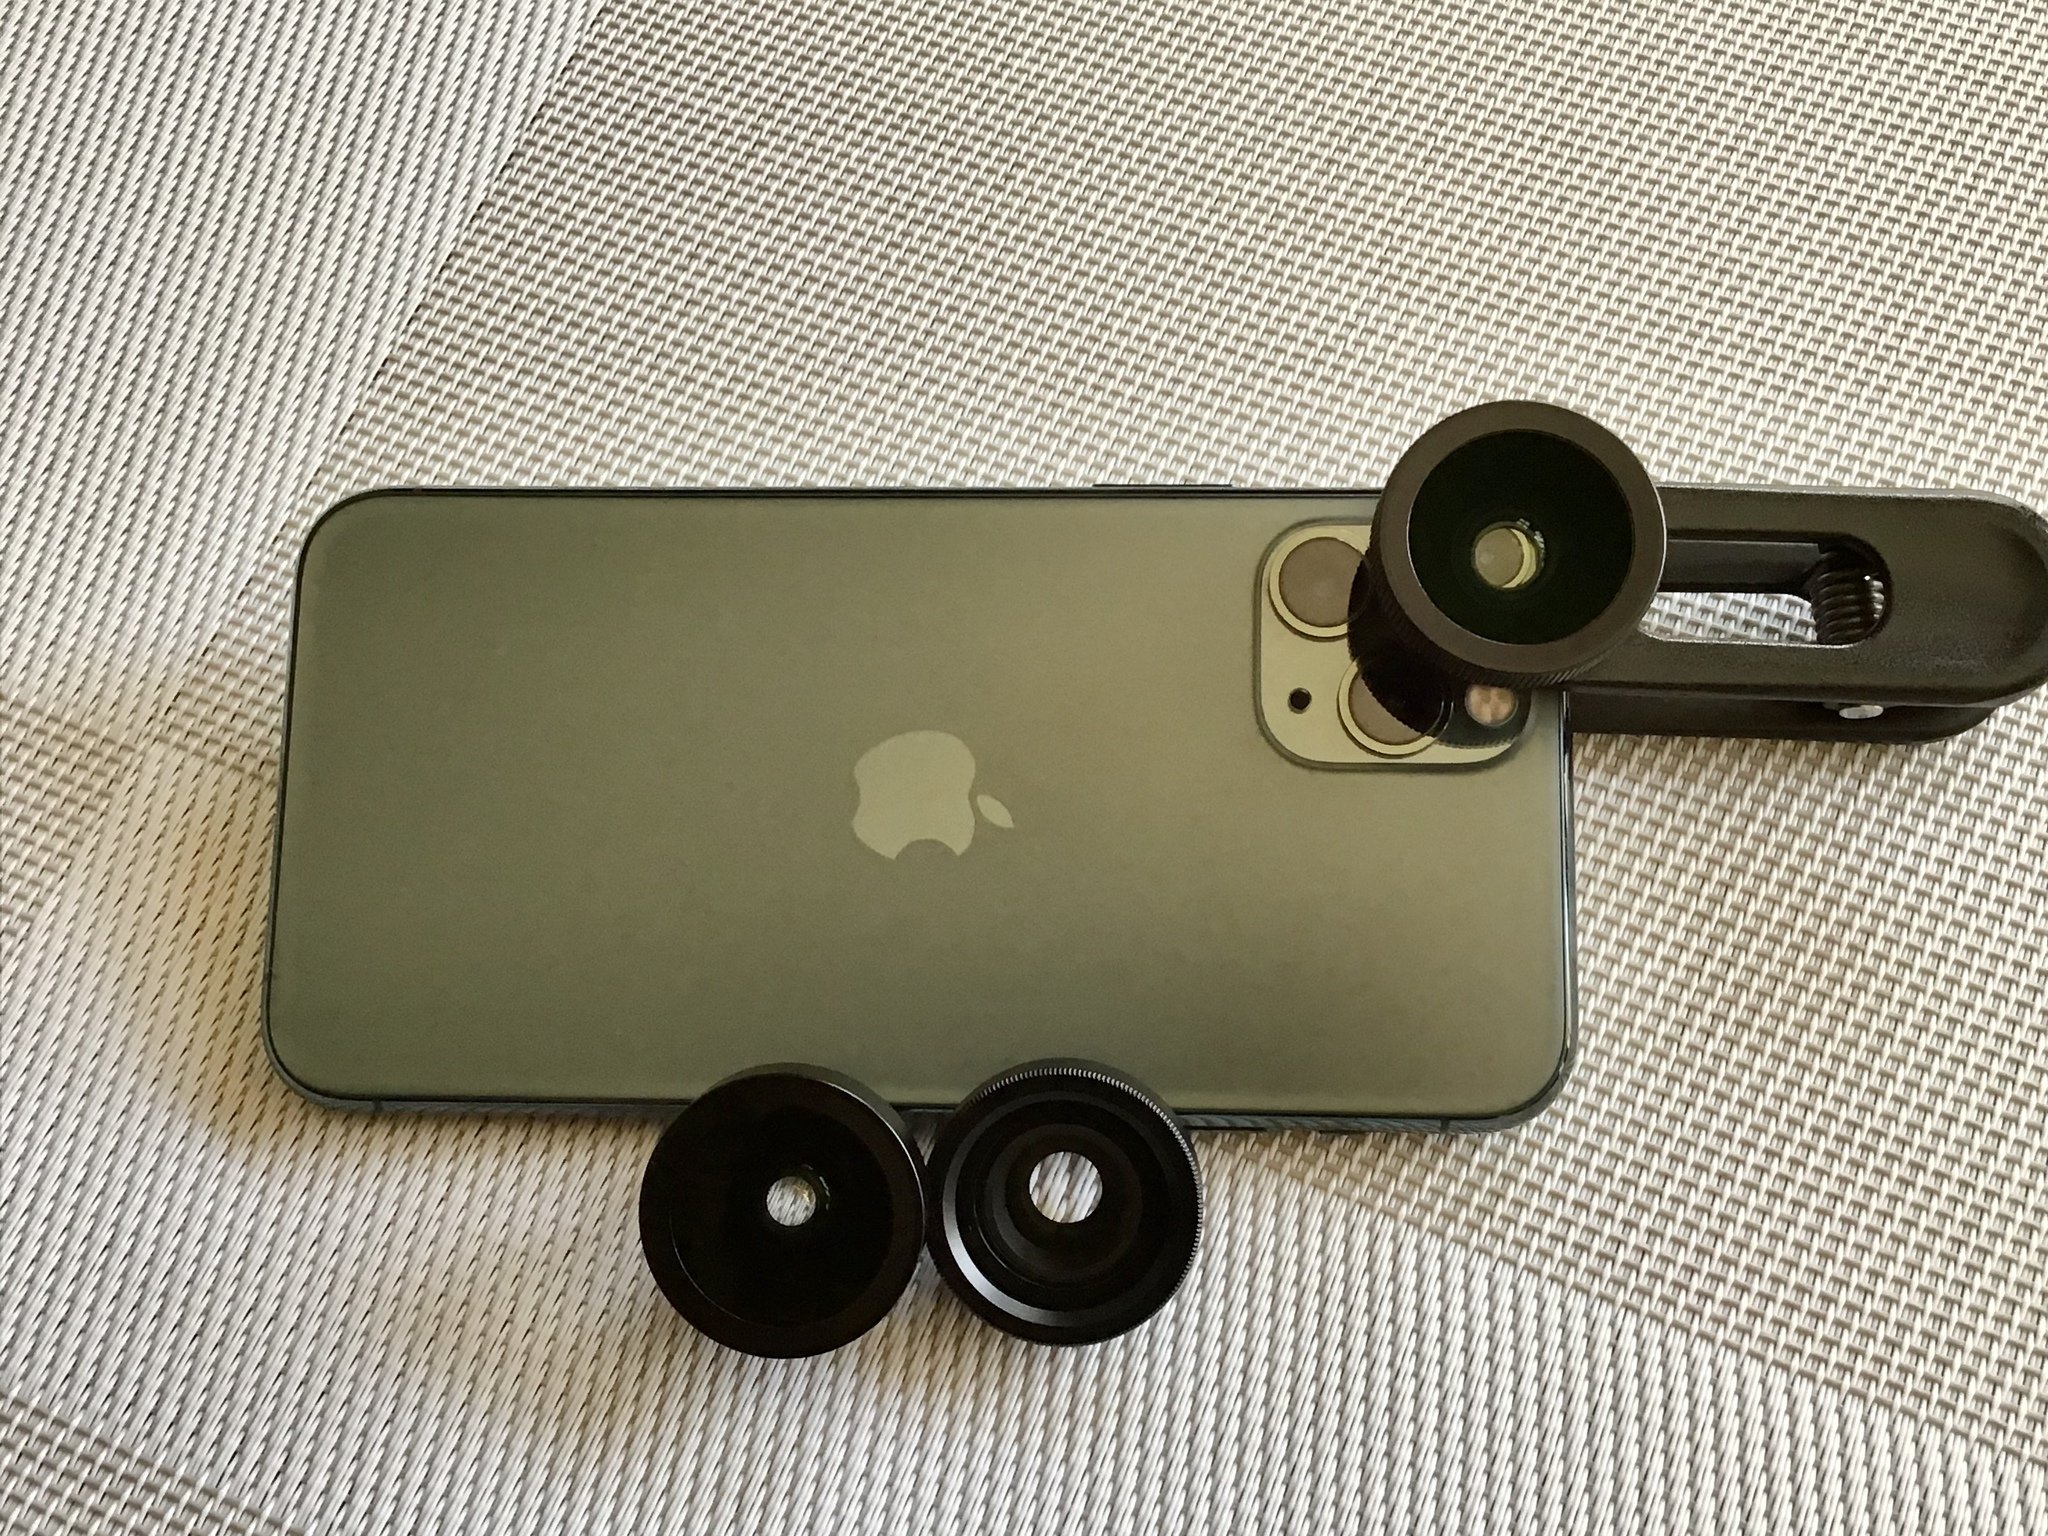 Kaal Observatie Momentum Hitcase OneClip Lens Clip and TrueLUX Lens Bundle review: Up your iPhone  photography game | iMore